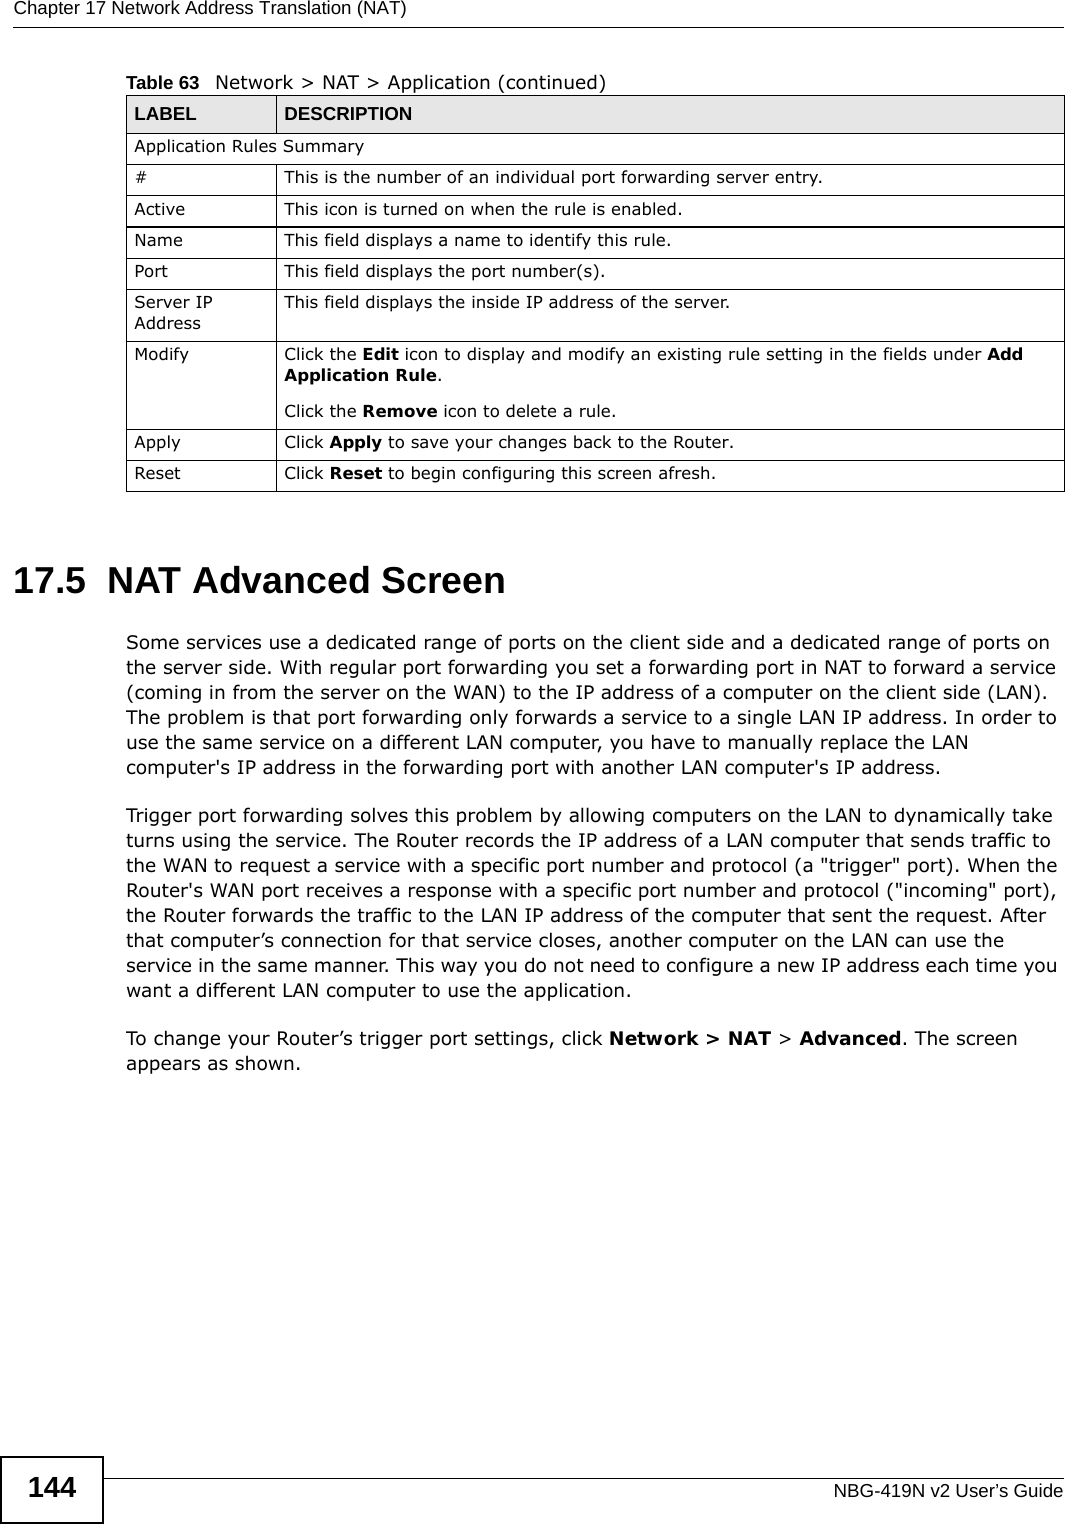 Chapter 17 Network Address Translation (NAT)NBG-419N v2 User’s Guide14417.5  NAT Advanced ScreenSome services use a dedicated range of ports on the client side and a dedicated range of ports on the server side. With regular port forwarding you set a forwarding port in NAT to forward a service (coming in from the server on the WAN) to the IP address of a computer on the client side (LAN). The problem is that port forwarding only forwards a service to a single LAN IP address. In order to use the same service on a different LAN computer, you have to manually replace the LAN computer&apos;s IP address in the forwarding port with another LAN computer&apos;s IP address. Trigger port forwarding solves this problem by allowing computers on the LAN to dynamically take turns using the service. The Router records the IP address of a LAN computer that sends traffic to the WAN to request a service with a specific port number and protocol (a &quot;trigger&quot; port). When the Router&apos;s WAN port receives a response with a specific port number and protocol (&quot;incoming&quot; port), the Router forwards the traffic to the LAN IP address of the computer that sent the request. After that computer’s connection for that service closes, another computer on the LAN can use the service in the same manner. This way you do not need to configure a new IP address each time you want a different LAN computer to use the application.To change your Router’s trigger port settings, click Network &gt; NAT &gt; Advanced. The screen appears as shown.Application Rules Summary#This is the number of an individual port forwarding server entry.Active This icon is turned on when the rule is enabled. Name This field displays a name to identify this rule.Port This field displays the port number(s). Server IP AddressThis field displays the inside IP address of the server.Modify Click the Edit icon to display and modify an existing rule setting in the fields under Add Application Rule. Click the Remove icon to delete a rule.Apply Click Apply to save your changes back to the Router.Reset Click Reset to begin configuring this screen afresh.Table 63   Network &gt; NAT &gt; Application (continued)LABEL DESCRIPTION